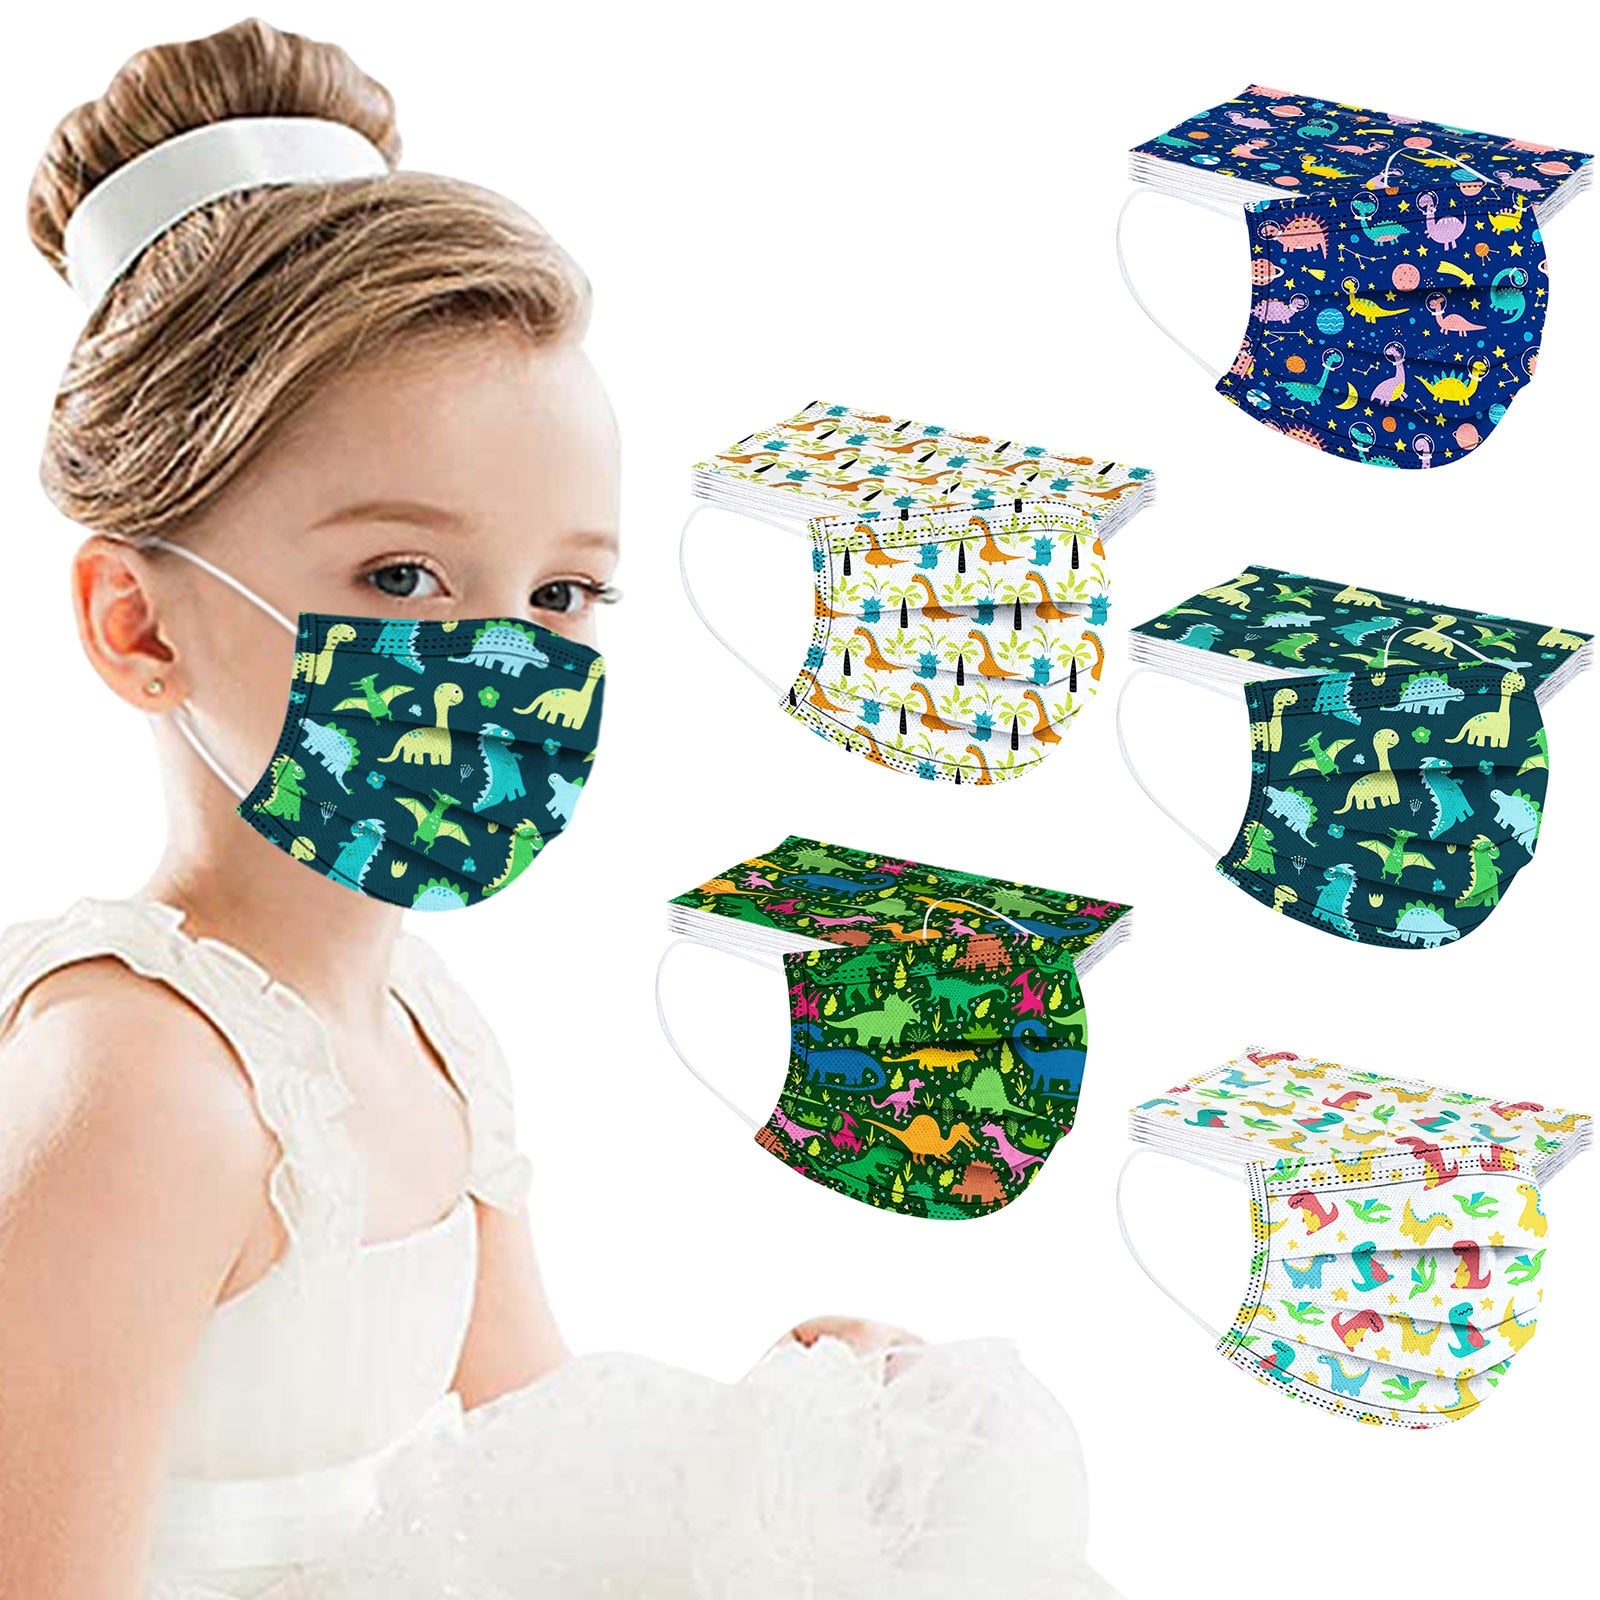 50PC Dinosaur Face Mask For Child Kids Disposable Face Mask With Pattern Cute 3ply Pm2.5 Mask For Baby Girls Earloop Bandage|Boys Costume Accessories|